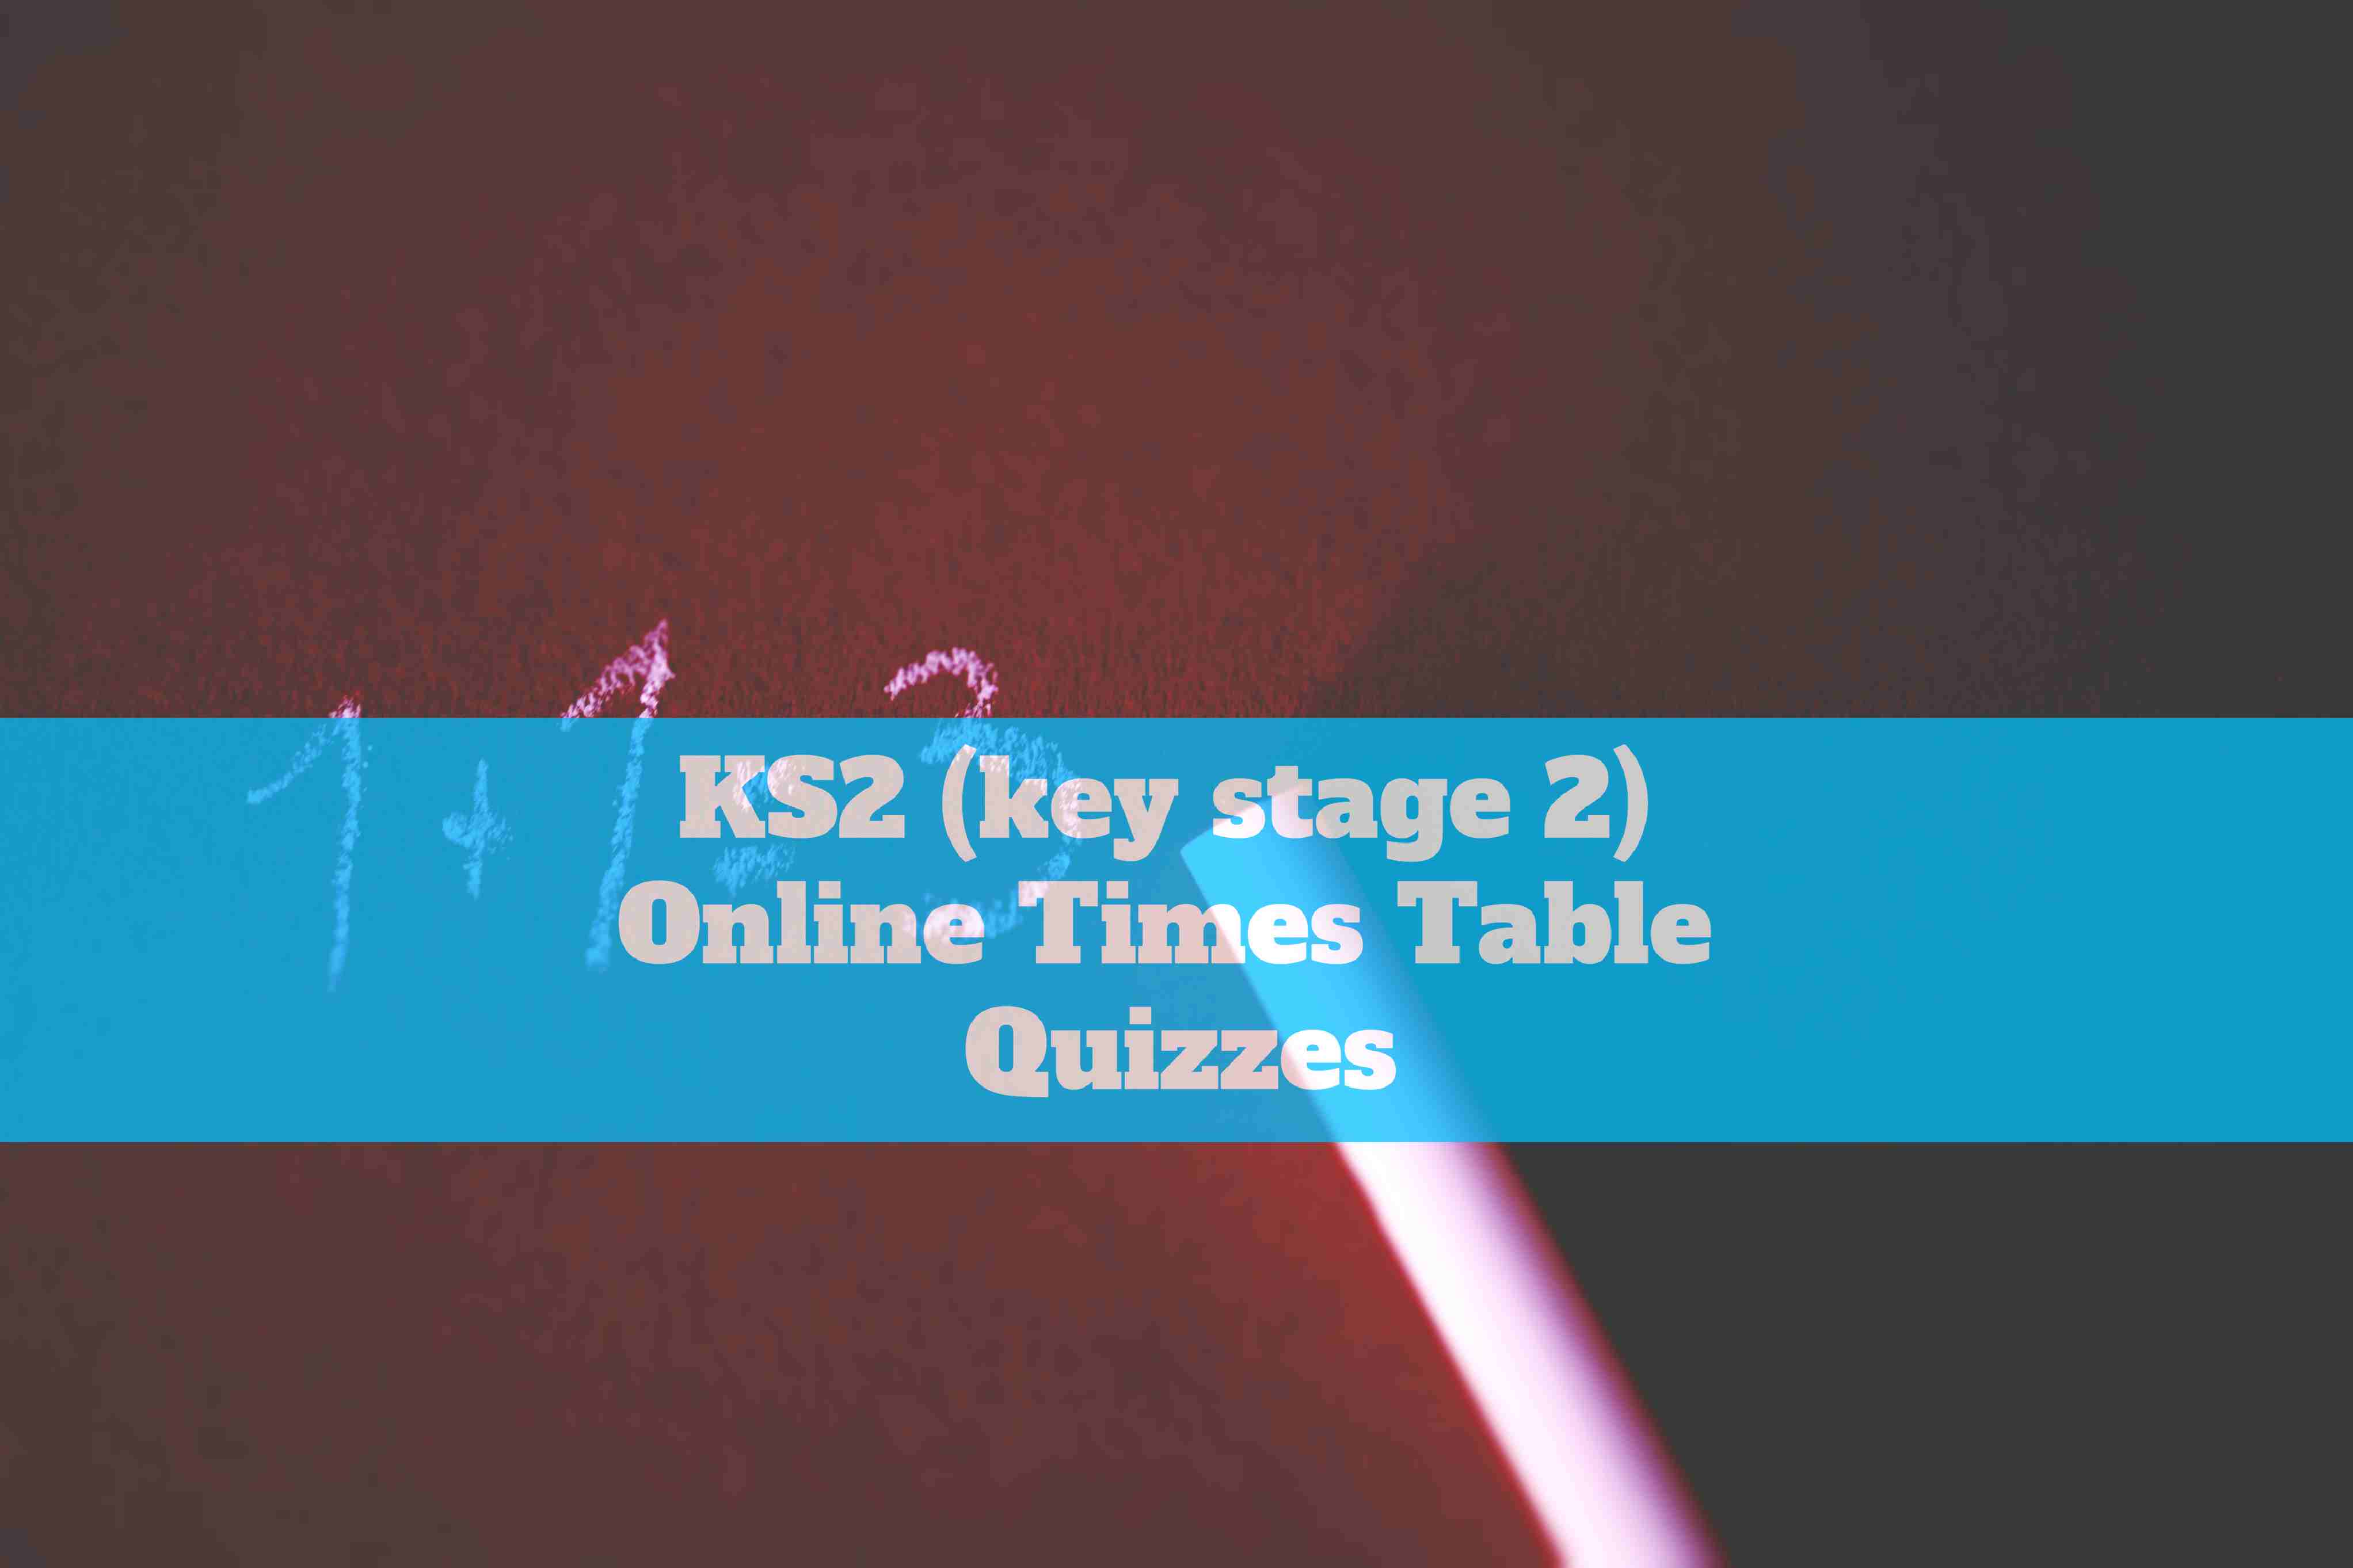 KS2 (key stage 2) Online Times Table Quizzes